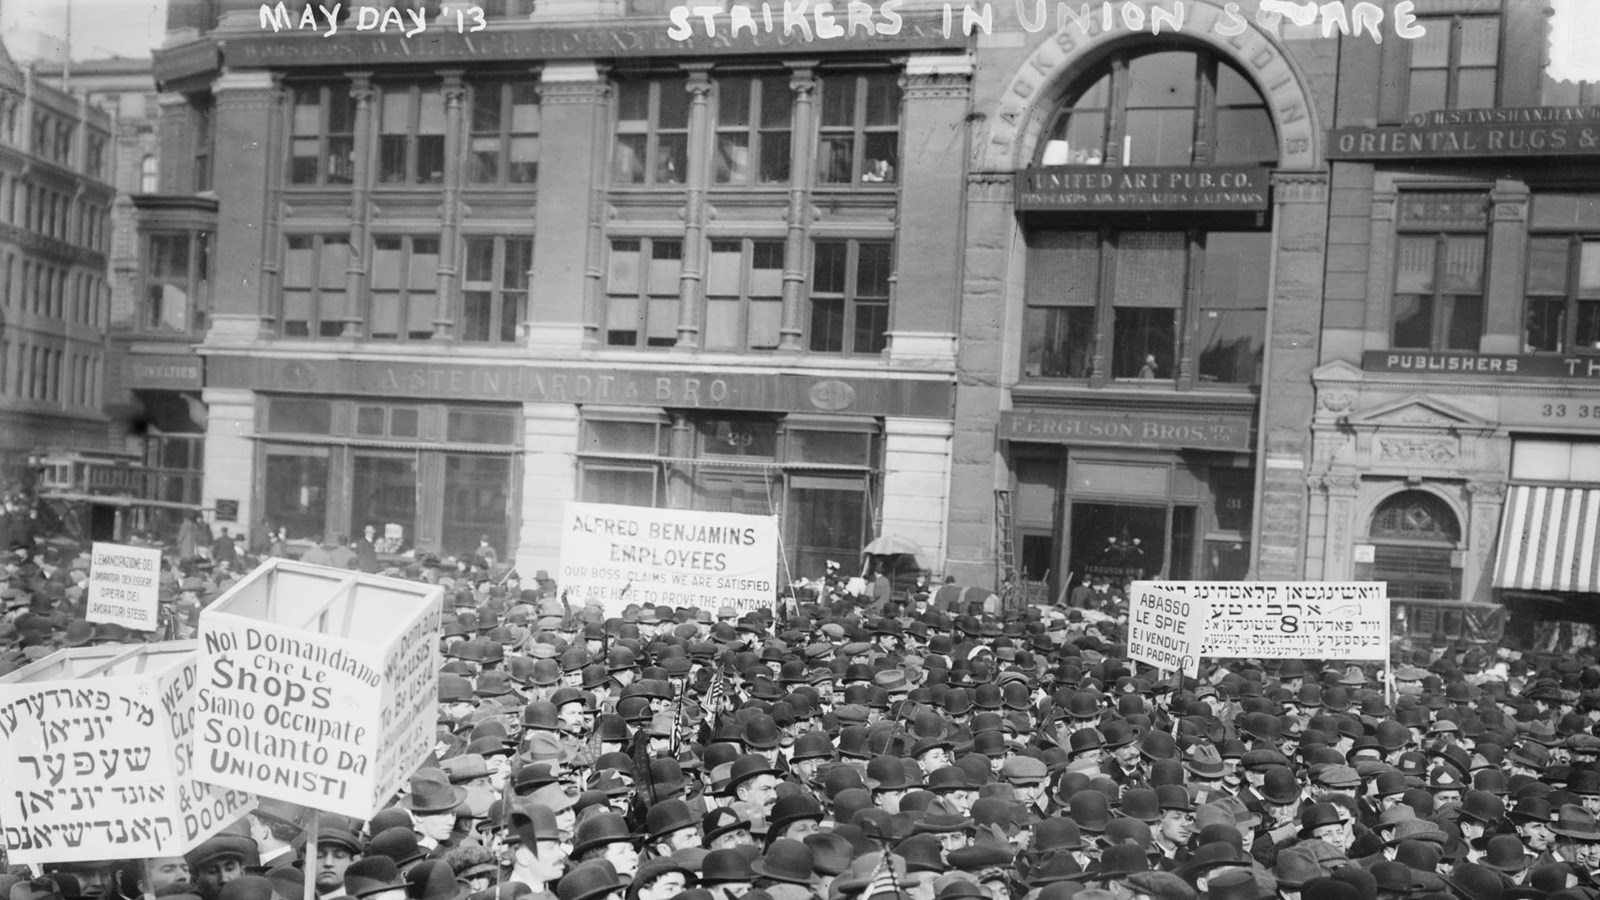 Historic black and white image of strikers in Union Square in Manhattan, New York City.